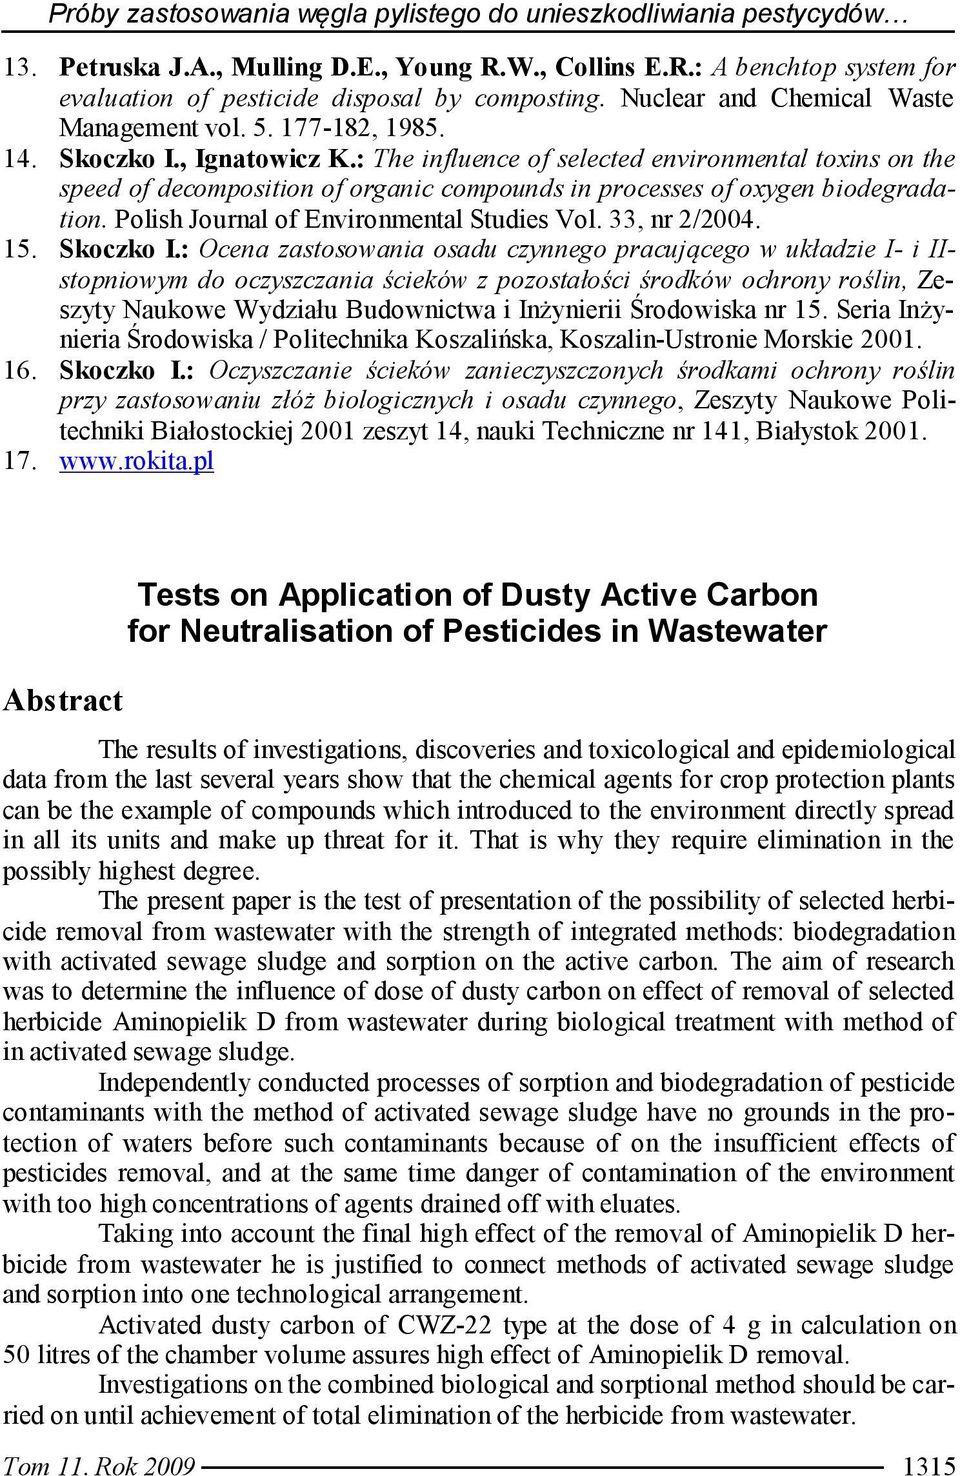 : The influence of selected environmental toxins on the speed of decomposition of organic compounds in processes of oxygen biodegradation. Polish Journal of Environmental Studies Vol. 33, nr 2/2004.